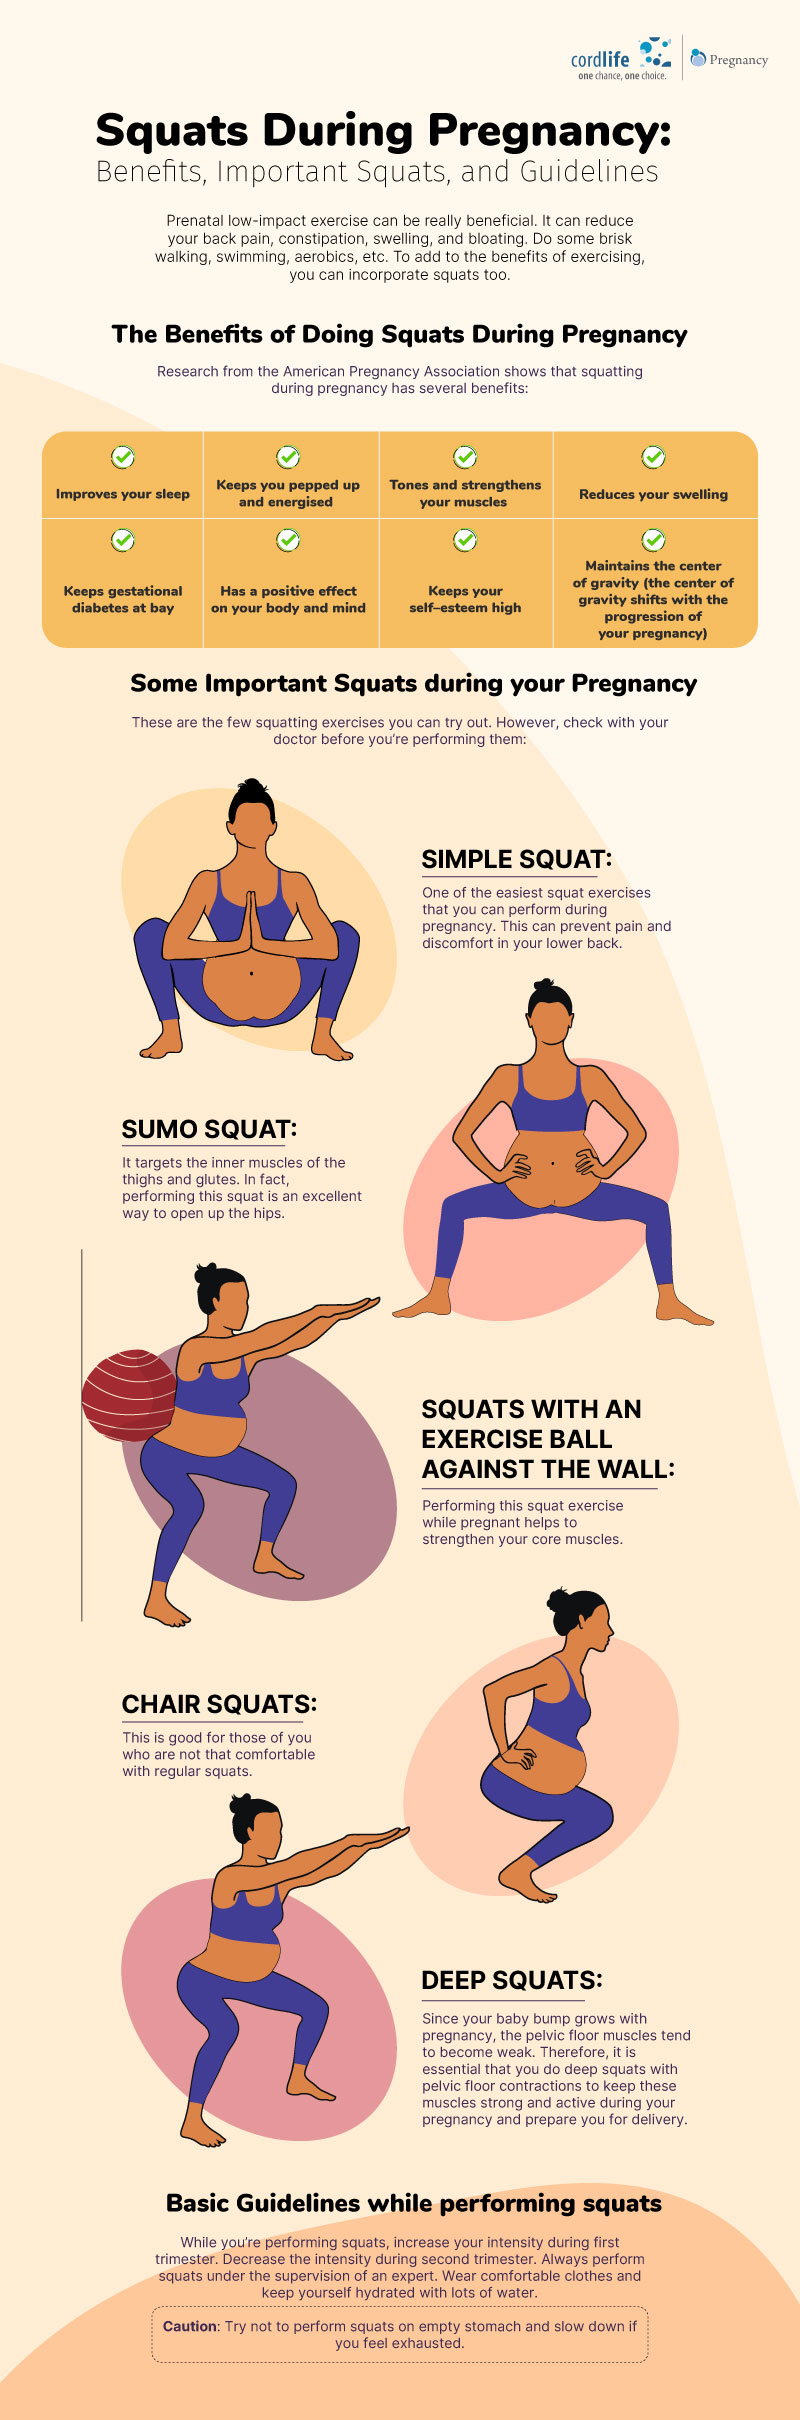 https://www.cordlifeindia.com/images/infographics/Squats-During-Pregnancy-Benefits-Important-Squats-and-Guidelines.jpg